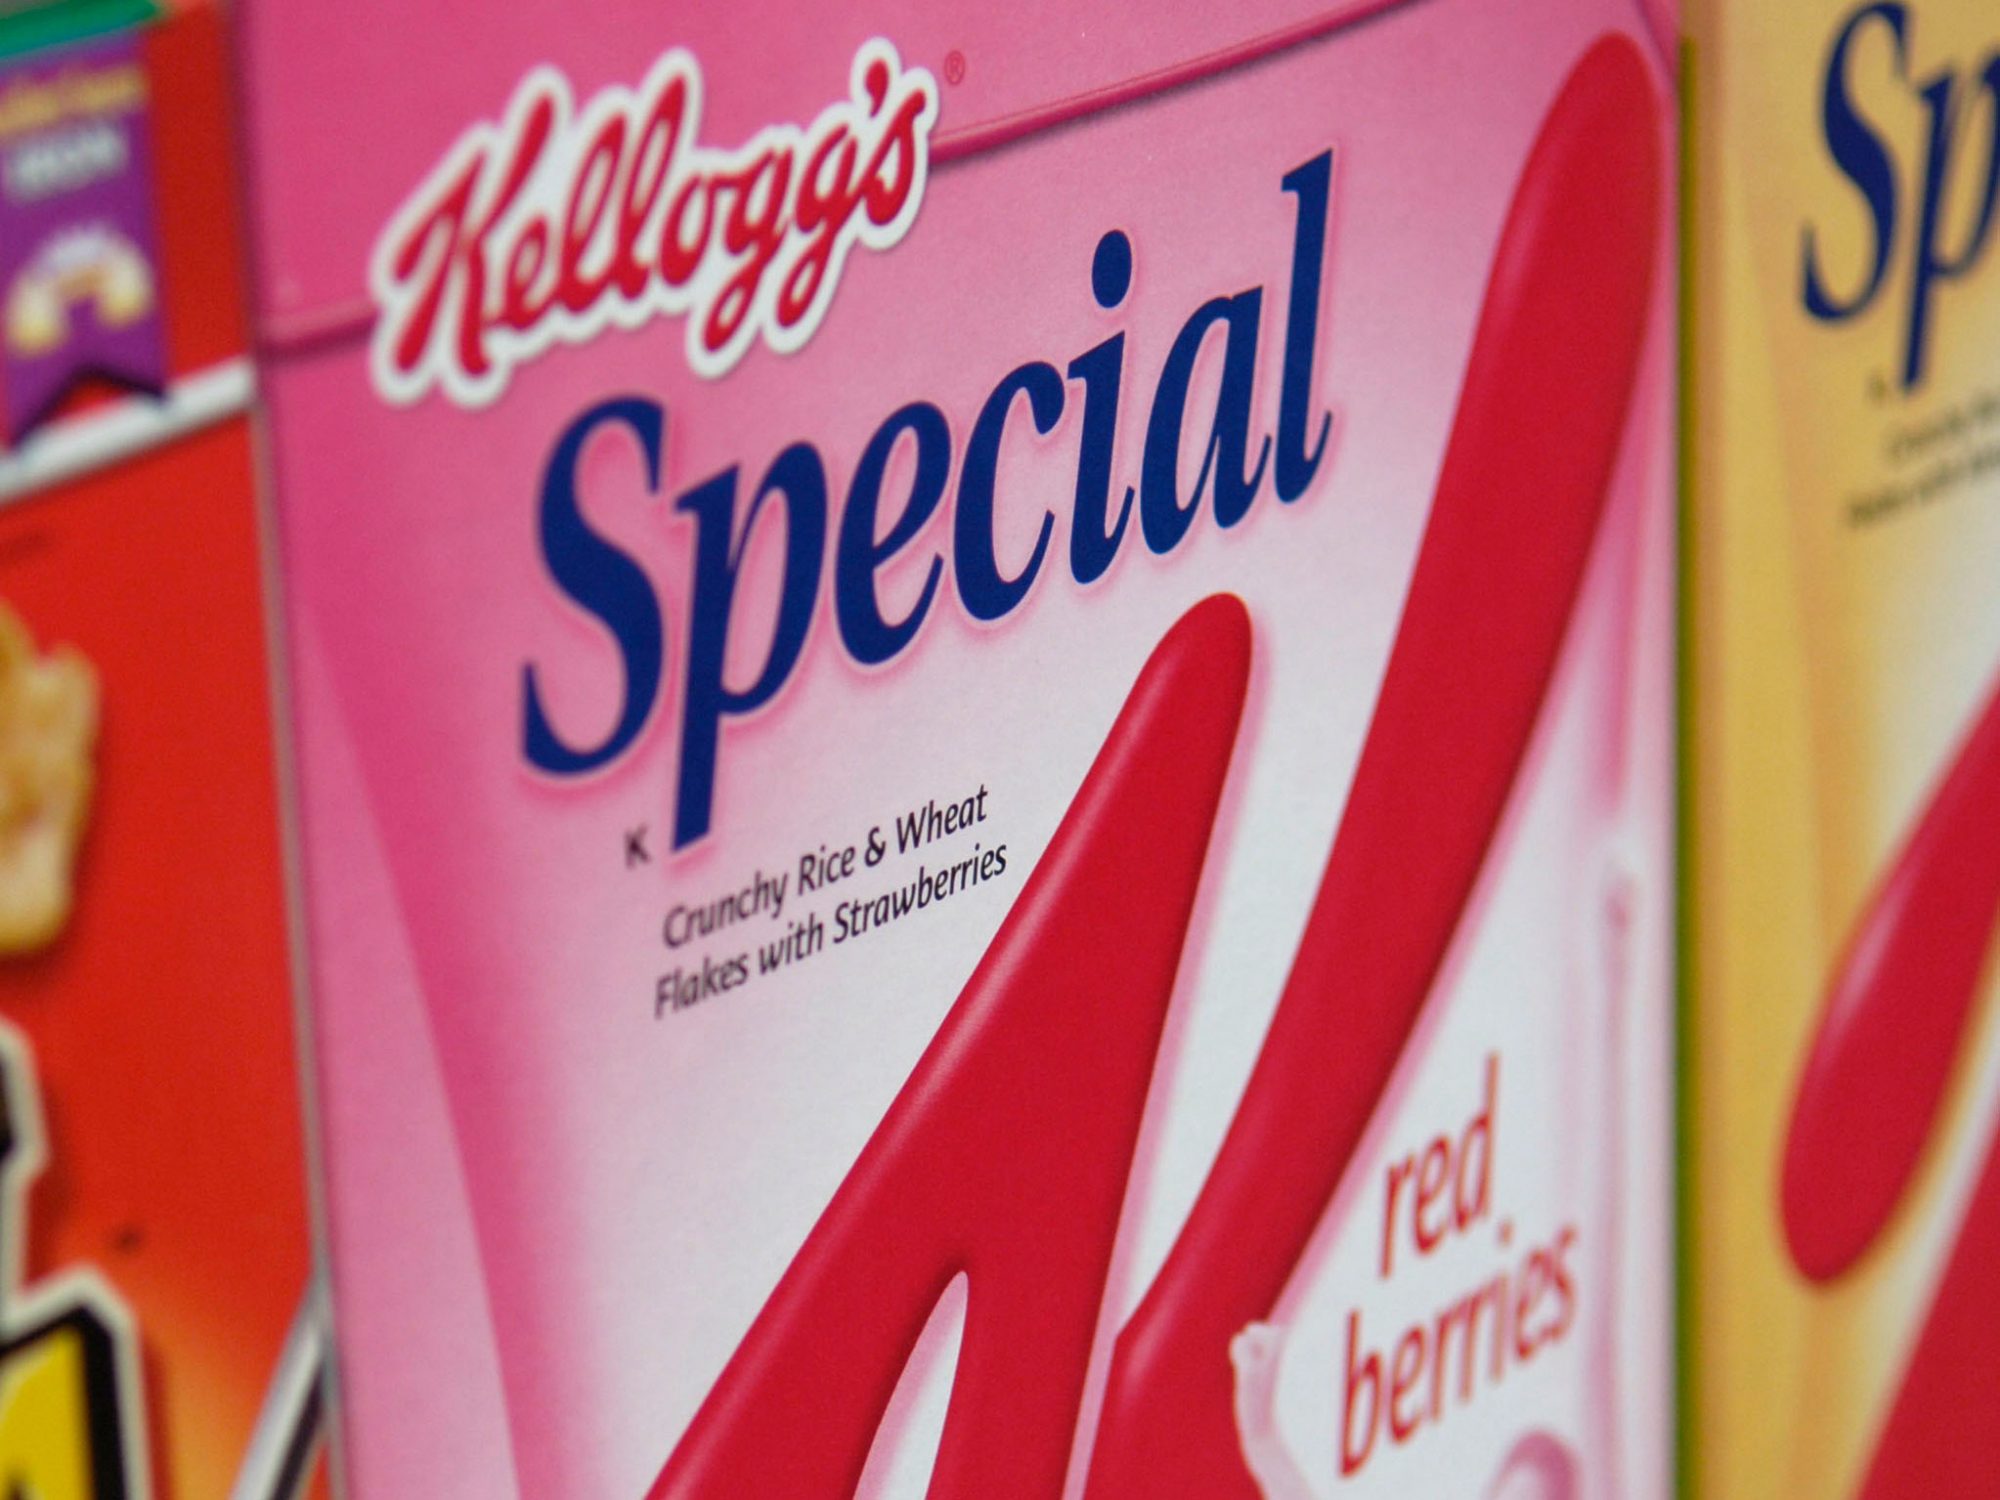 REVIEW: Kellogg's Limited Edition Special K Chocolatey Strawberry